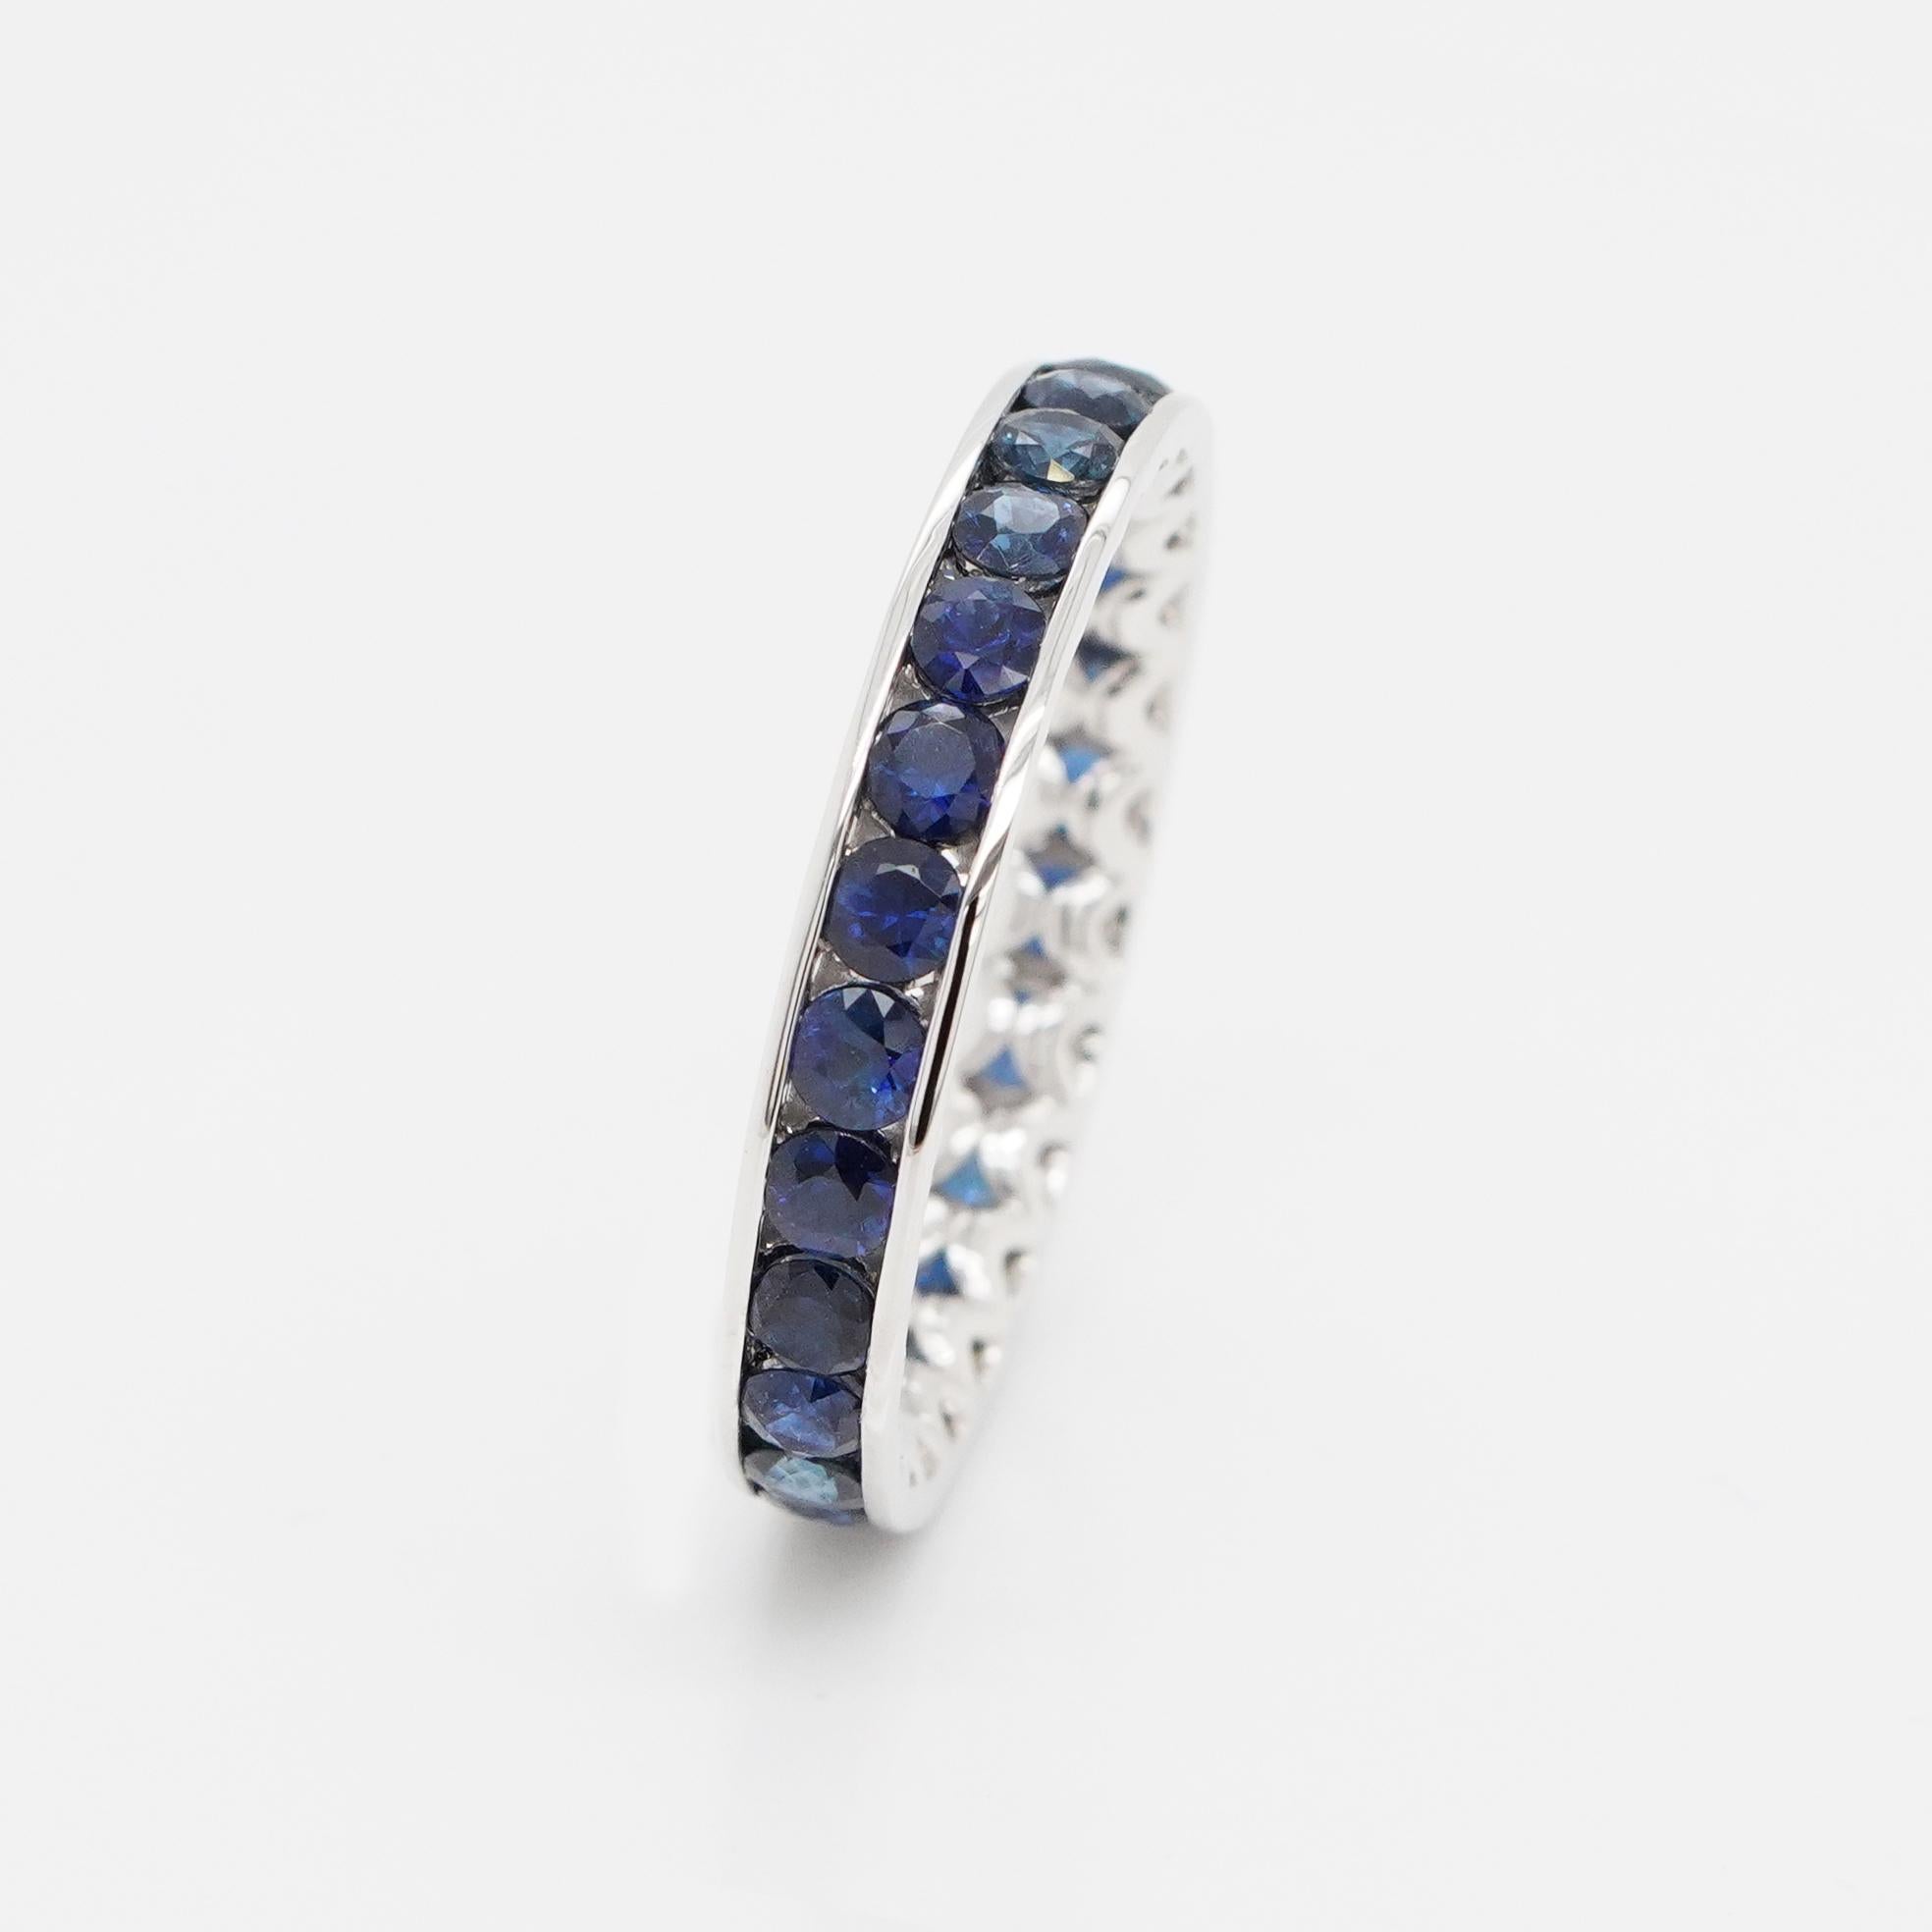 Round Cut 18K White Gold And Sapphire Eternity Band Ring 1.88 ct. For Sale